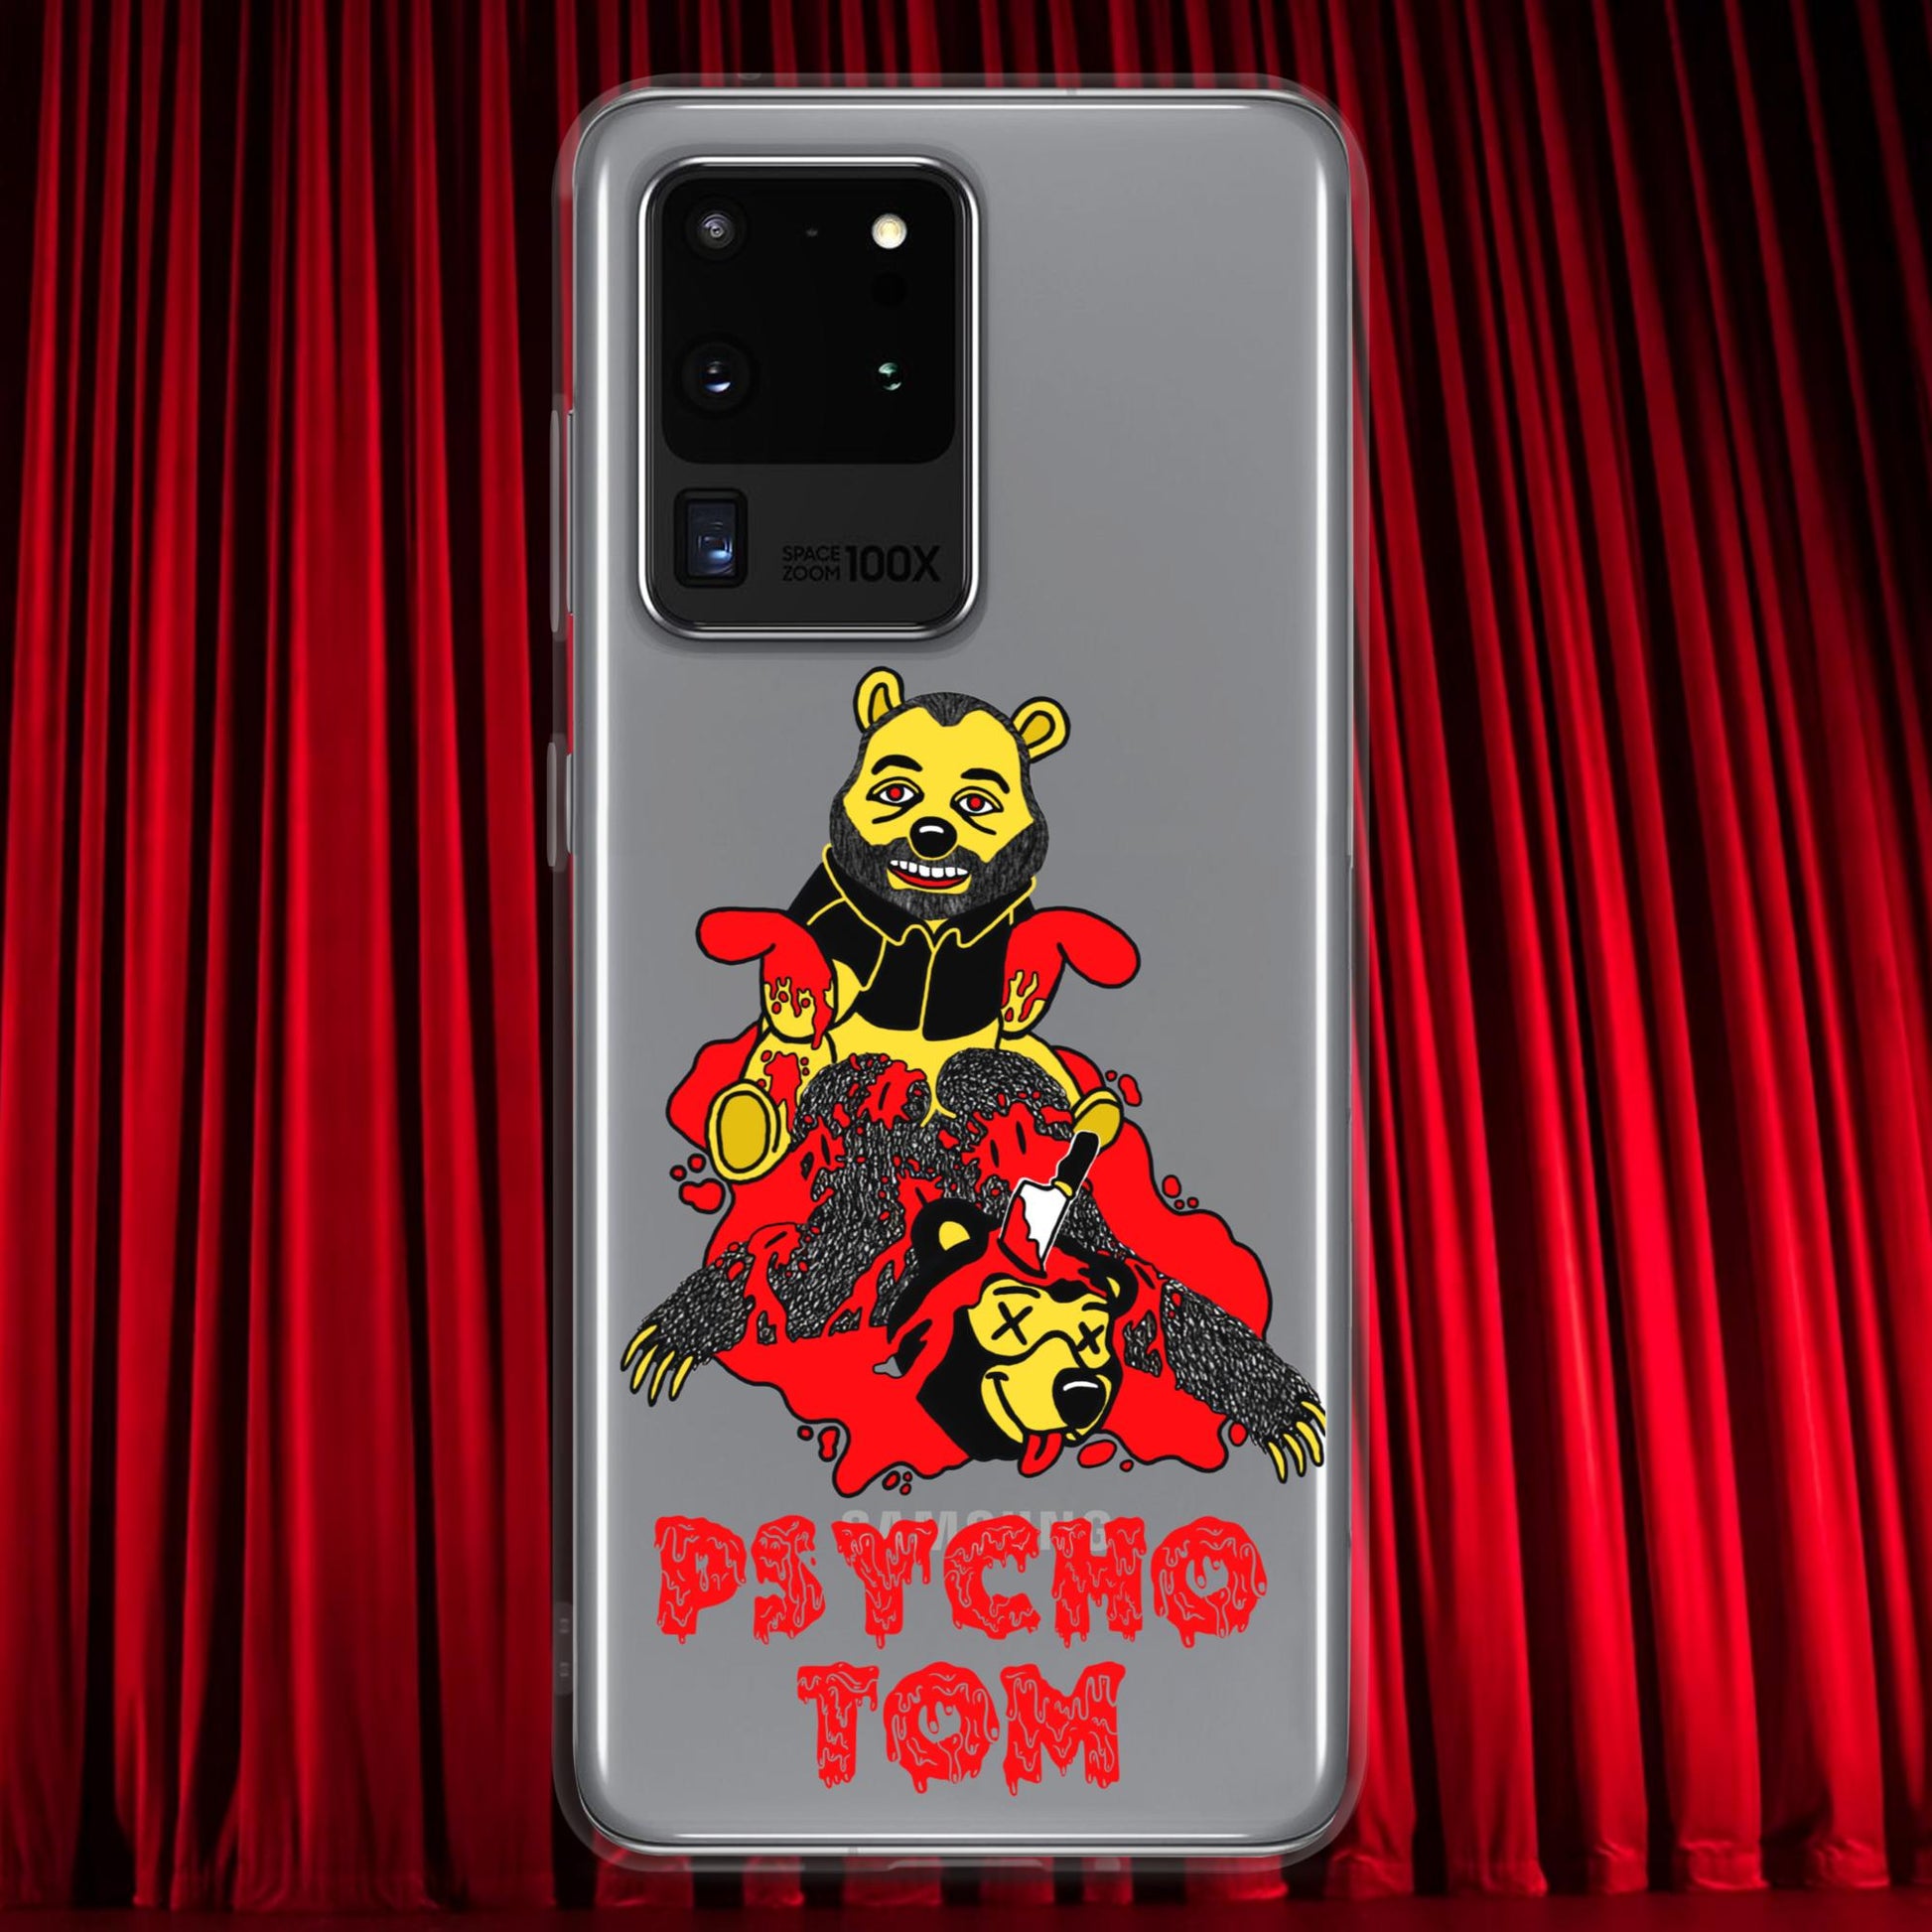 Psycho Tom Segura Clear Case for Samsung, Tom Segura Samsung case, Tom Segura phone case, 2b1c phone case, 2 Bears 1 Cave merch, YMH merch Next Cult Brand 2 Bears 1 Cave, Podcasts, Stand-up Comedy, Tom Segura, YMH